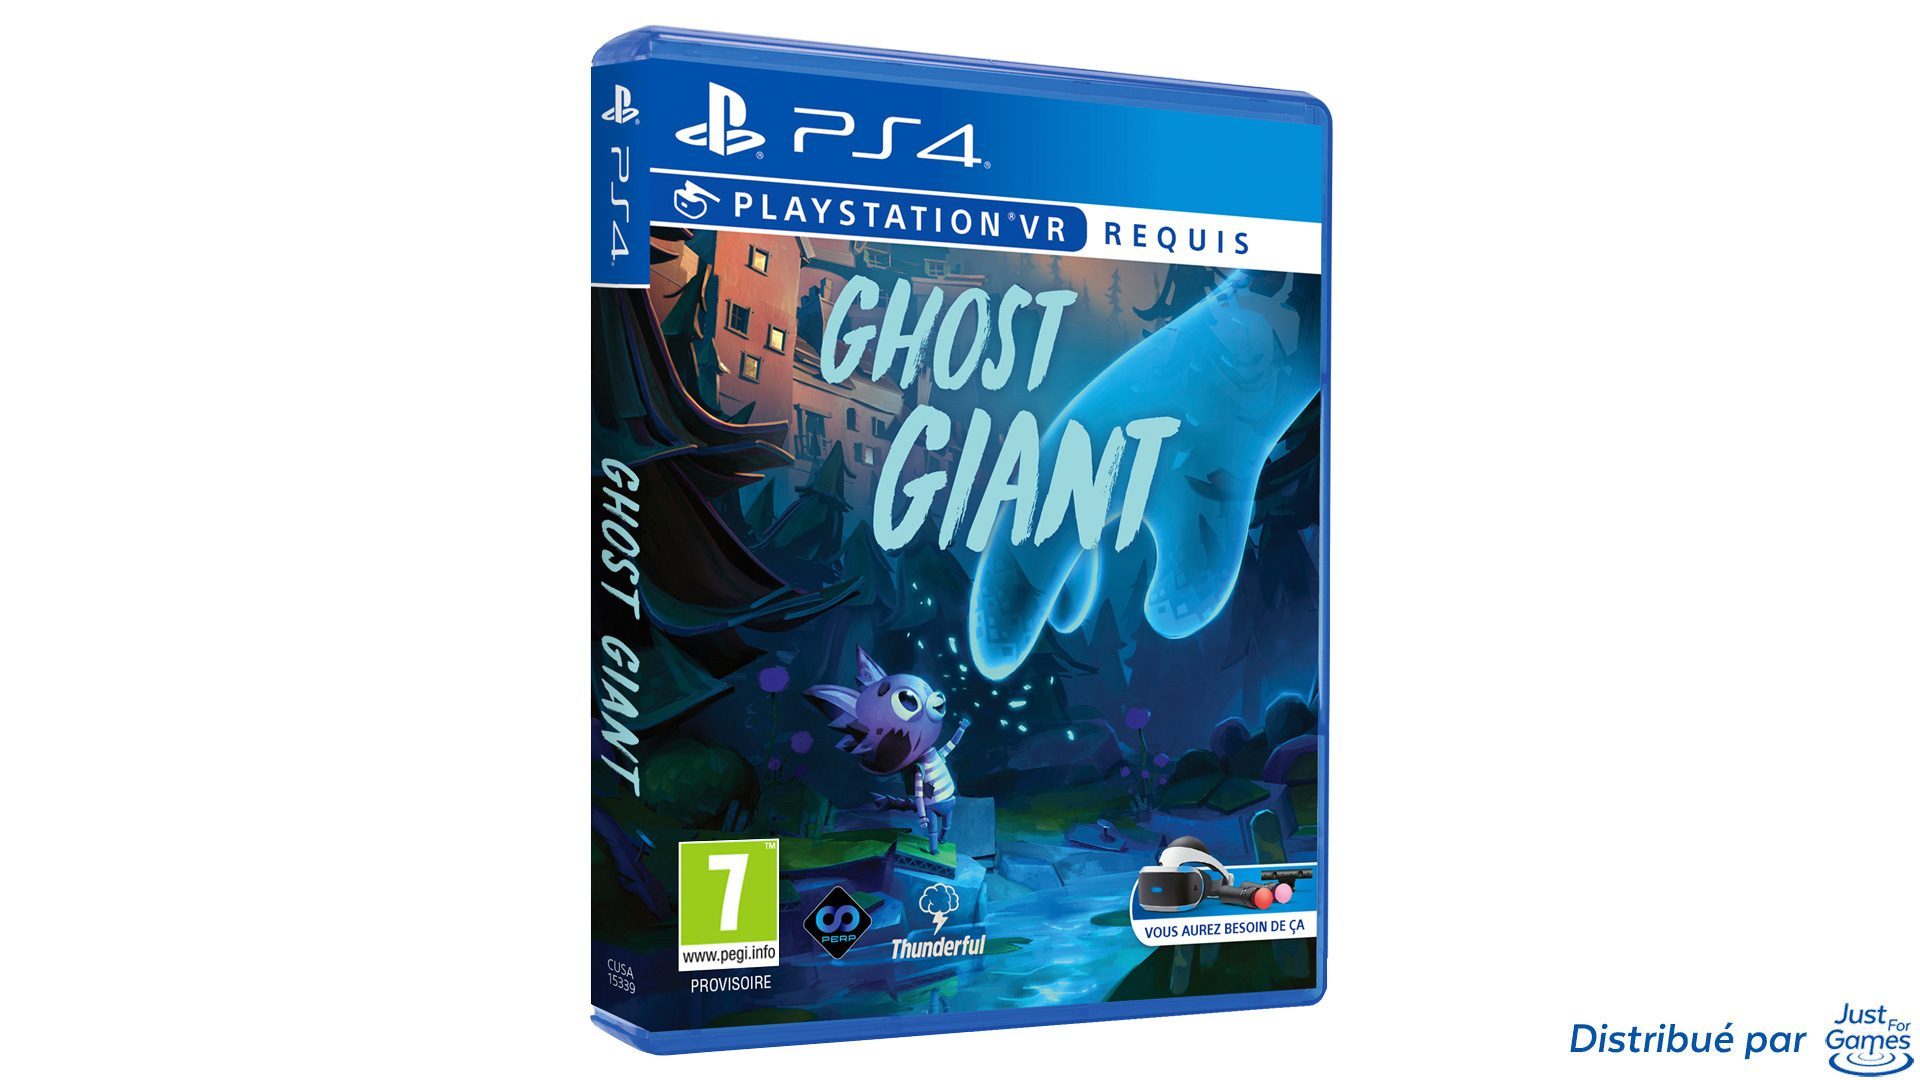 ghost giant price download free